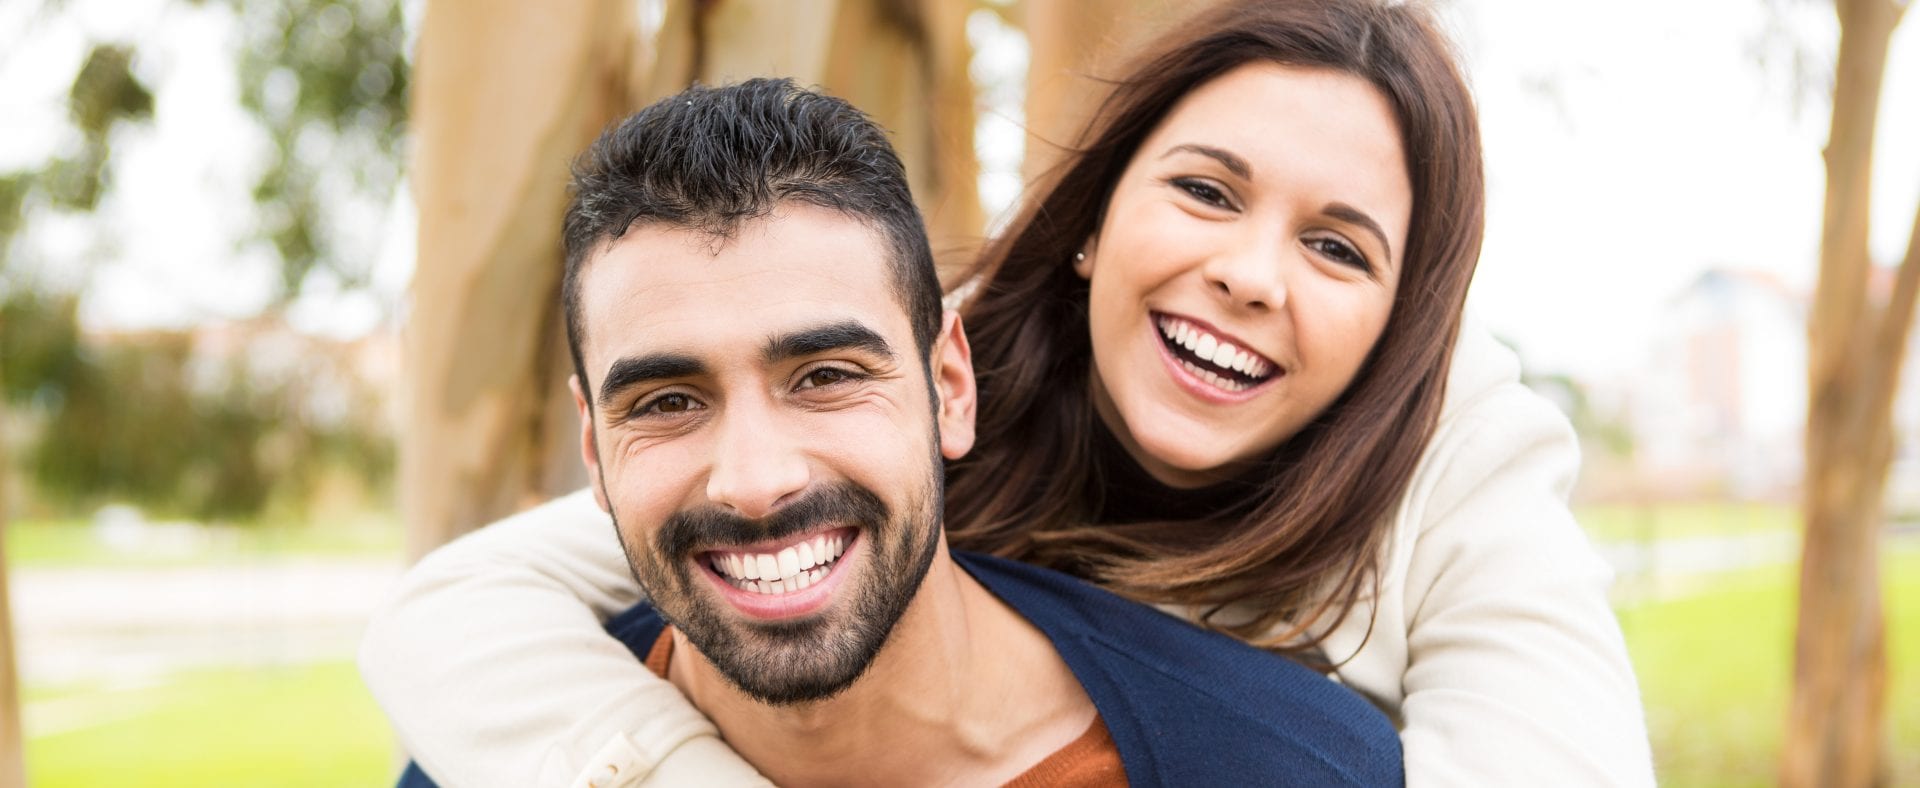 orthodontics for adults | Crane & Seager Orthodontics in Fort Collins and Loveland, CO